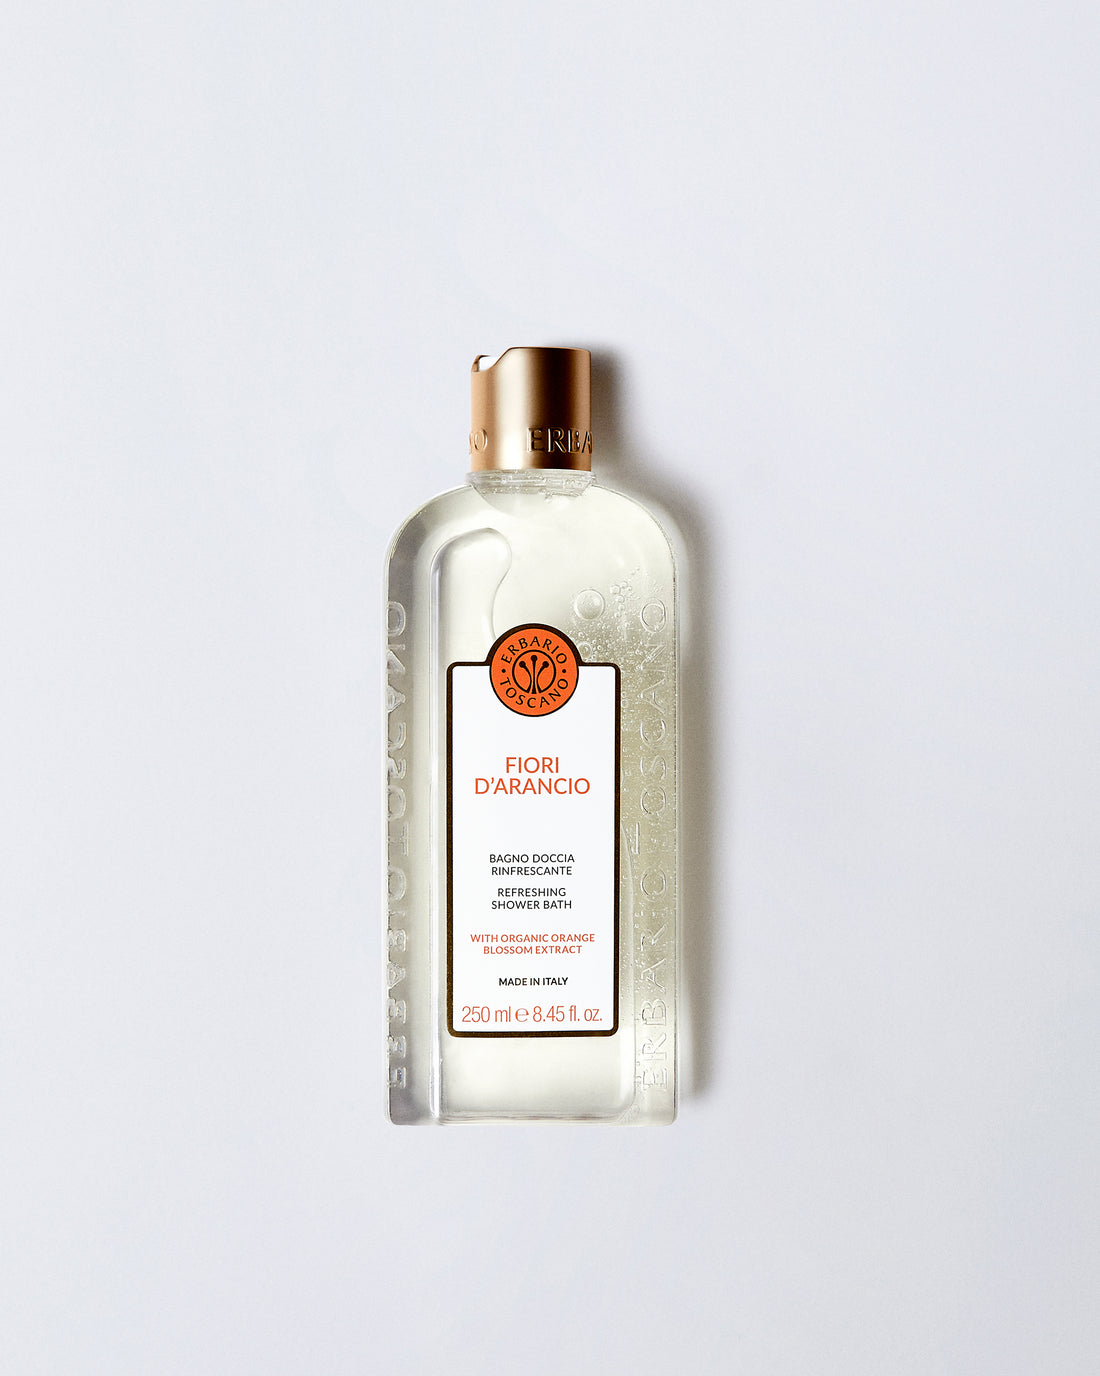 SHOWER BATH WITH ORANGE BLOSSOM EXTRACT 250ml